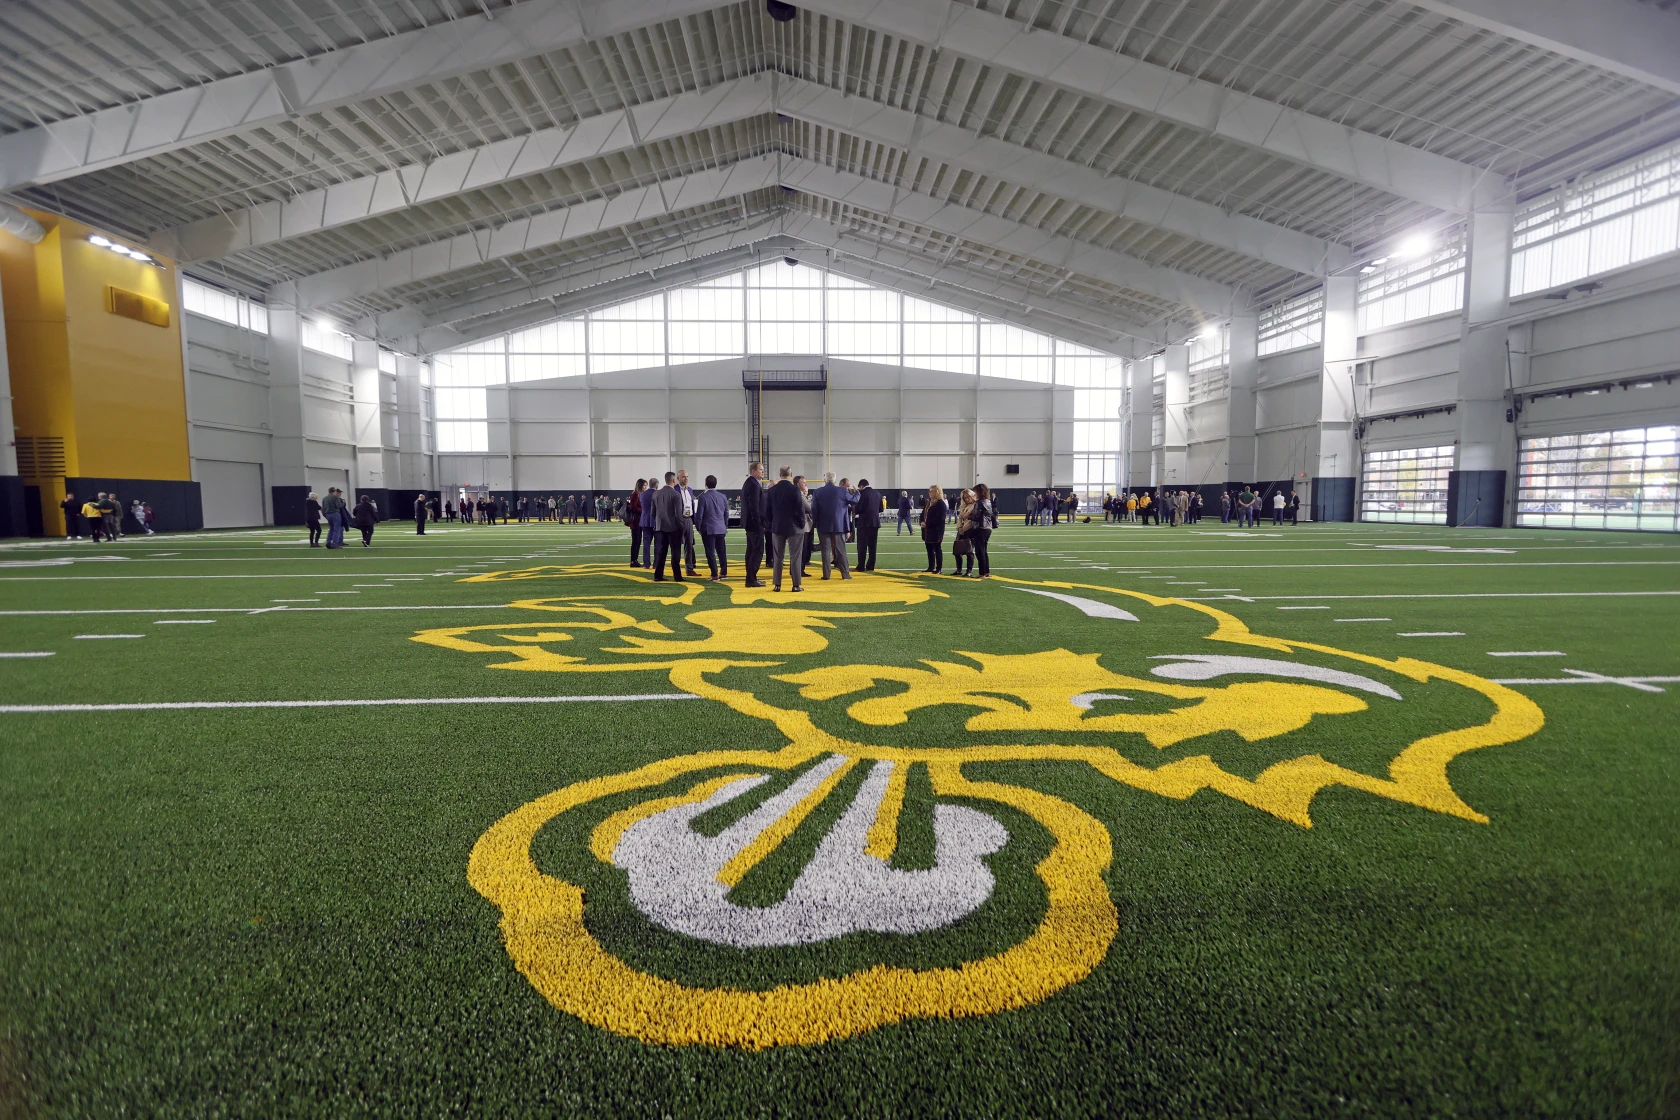 Northern exposure: Indoor facilities almost a necessity for Bison, Jacks in reaching FCS title game